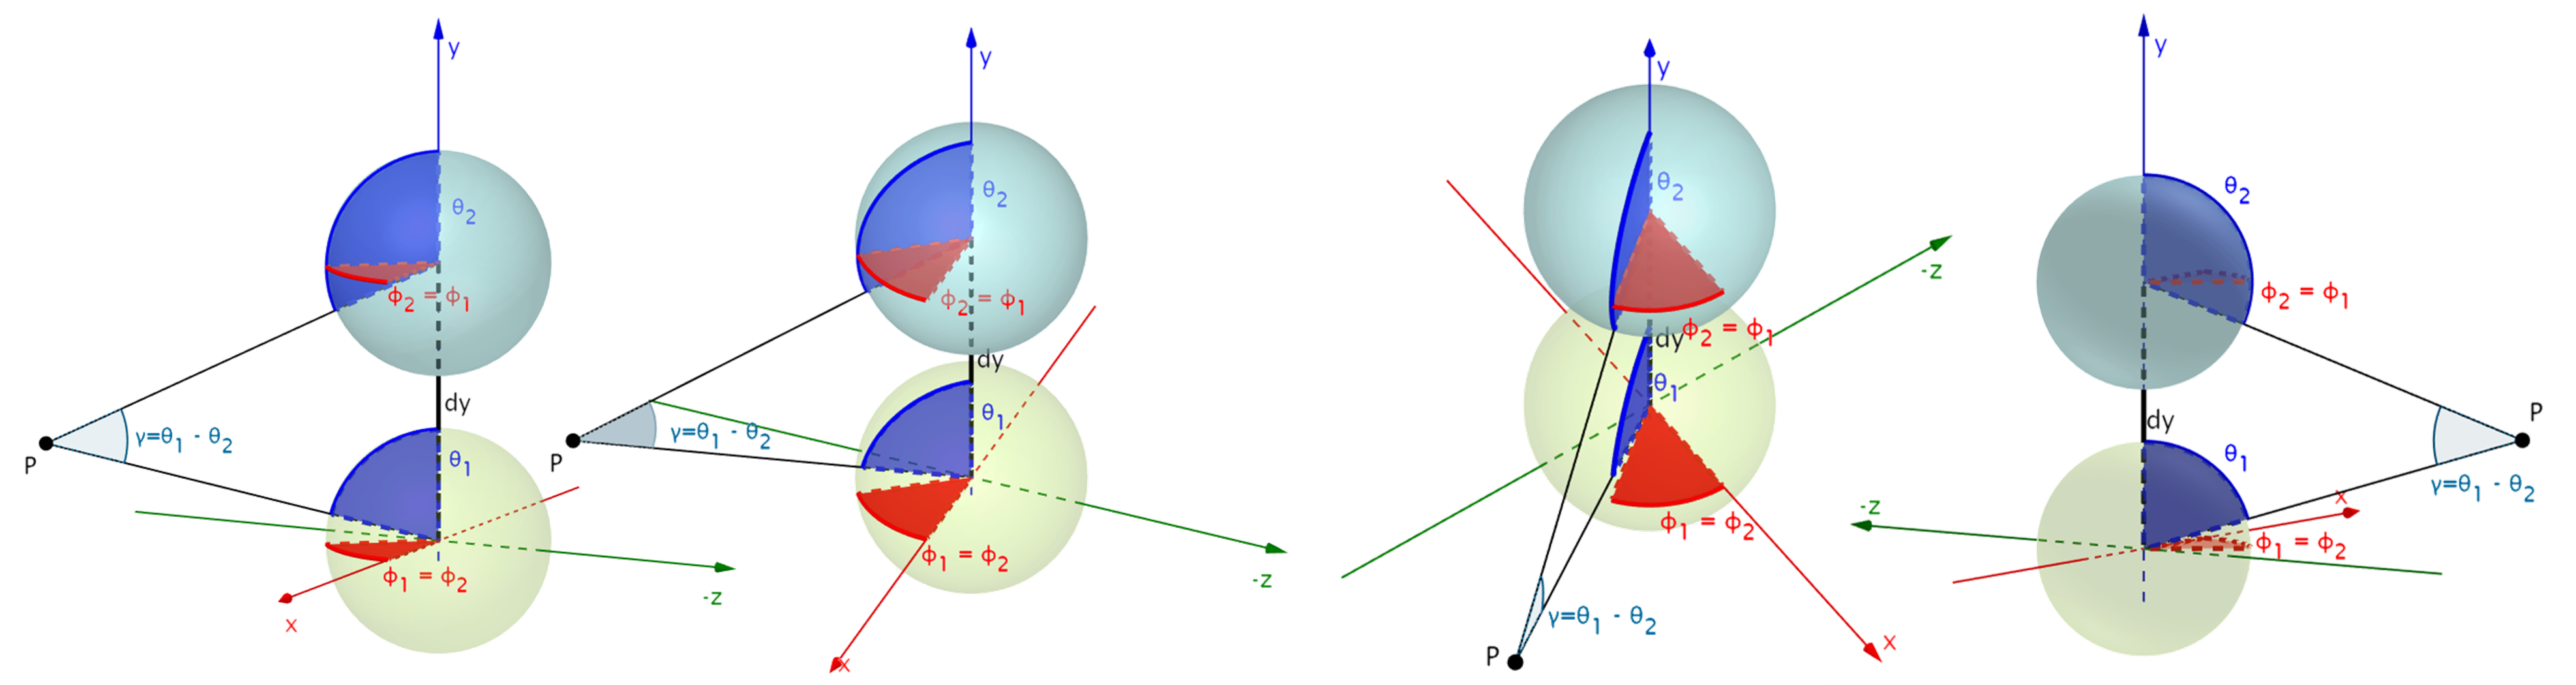 Spherical Angular Disparity for 2 Vertically Displaced Viewpoints